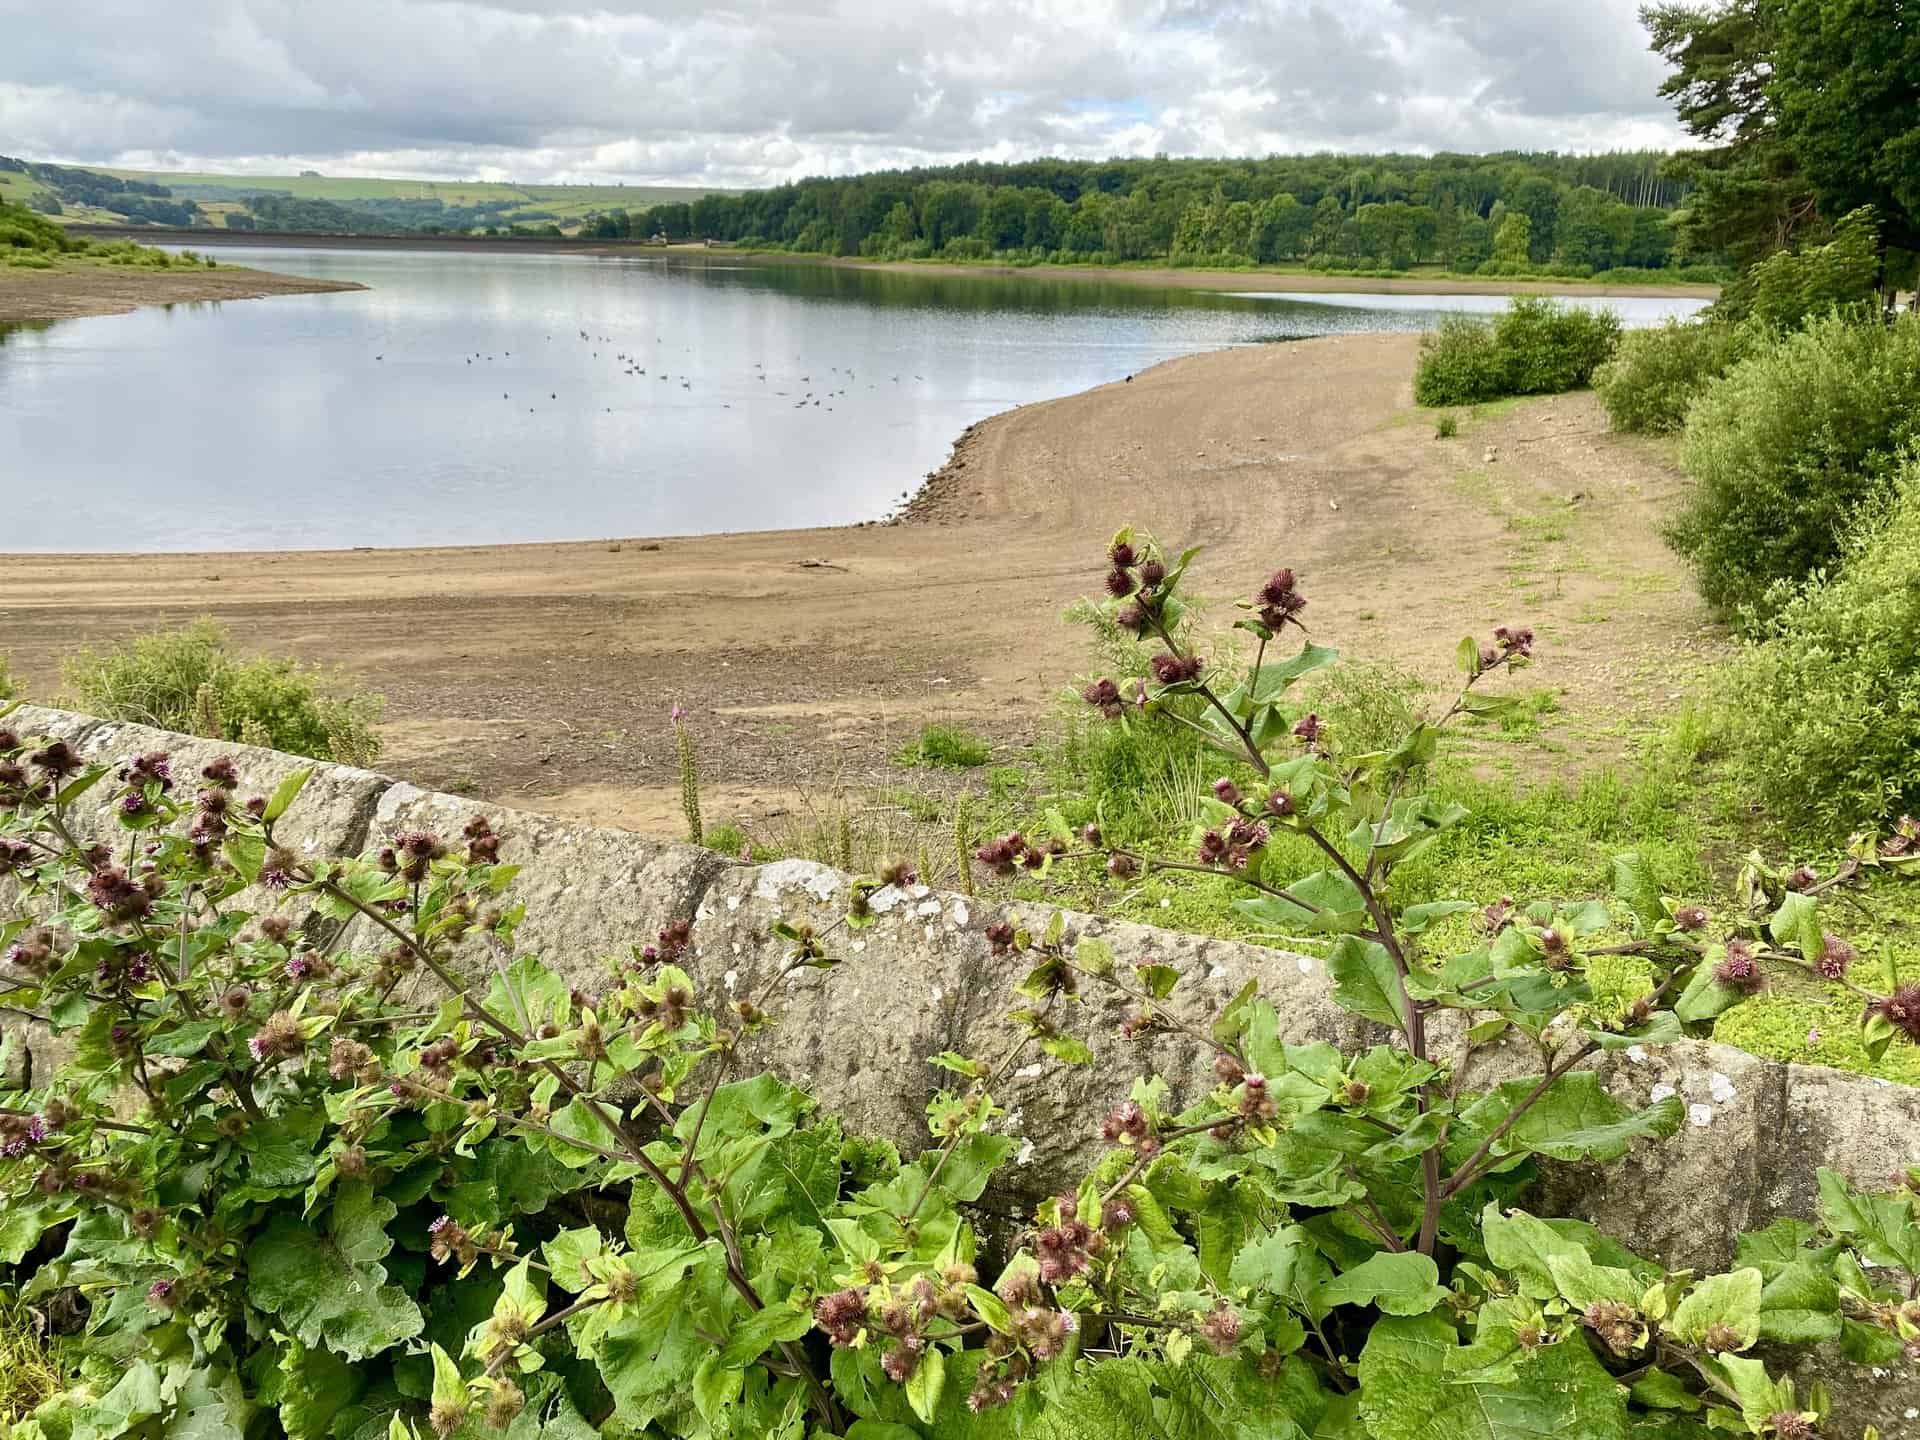 Looking south from Swinsty Reservoir's causeway, pointing towards Swinsty Embankment.